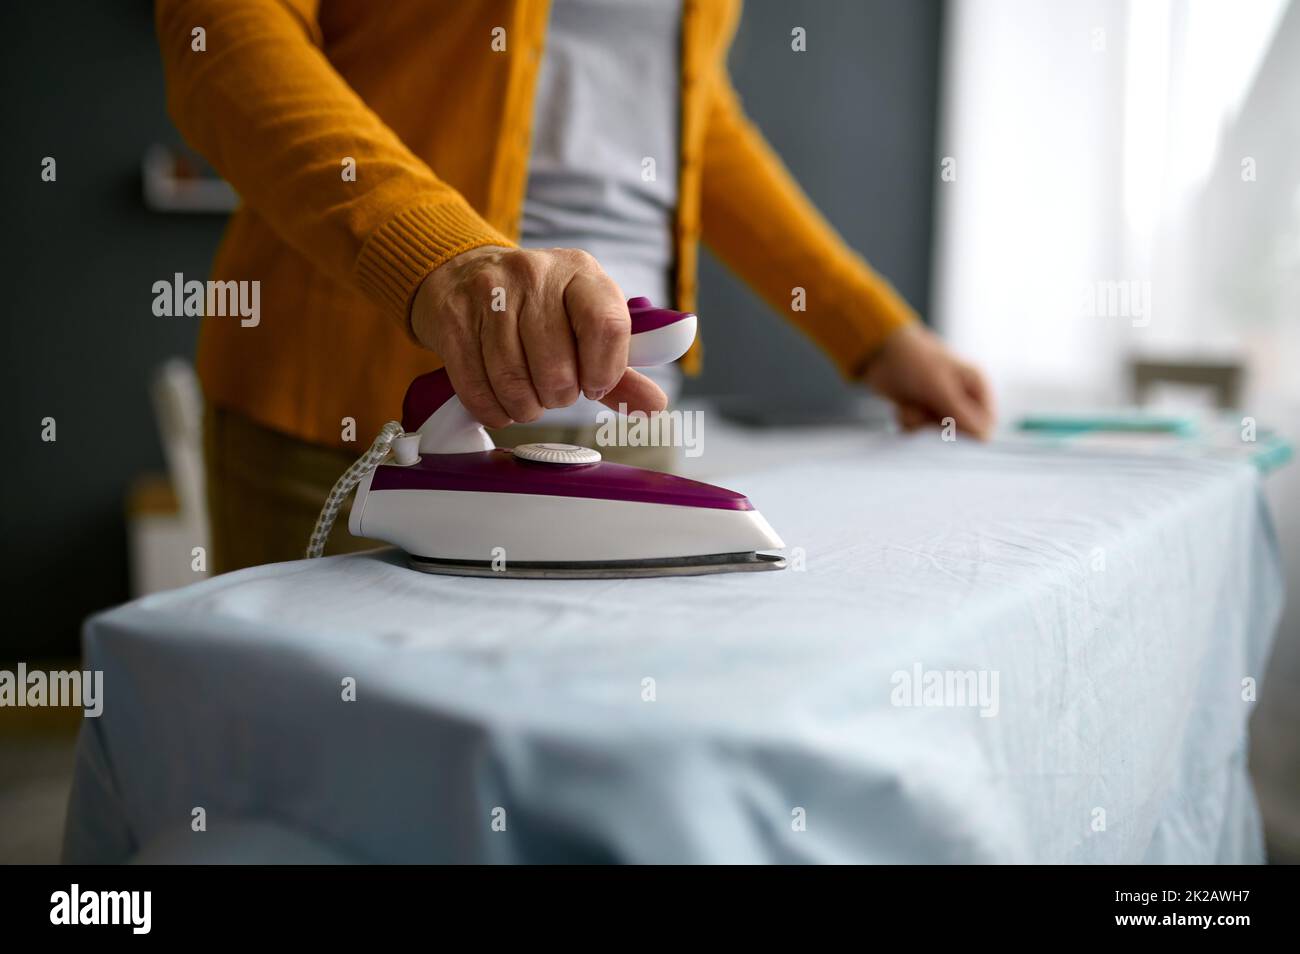 Retired aged woman ironing clothes on board Stock Photo